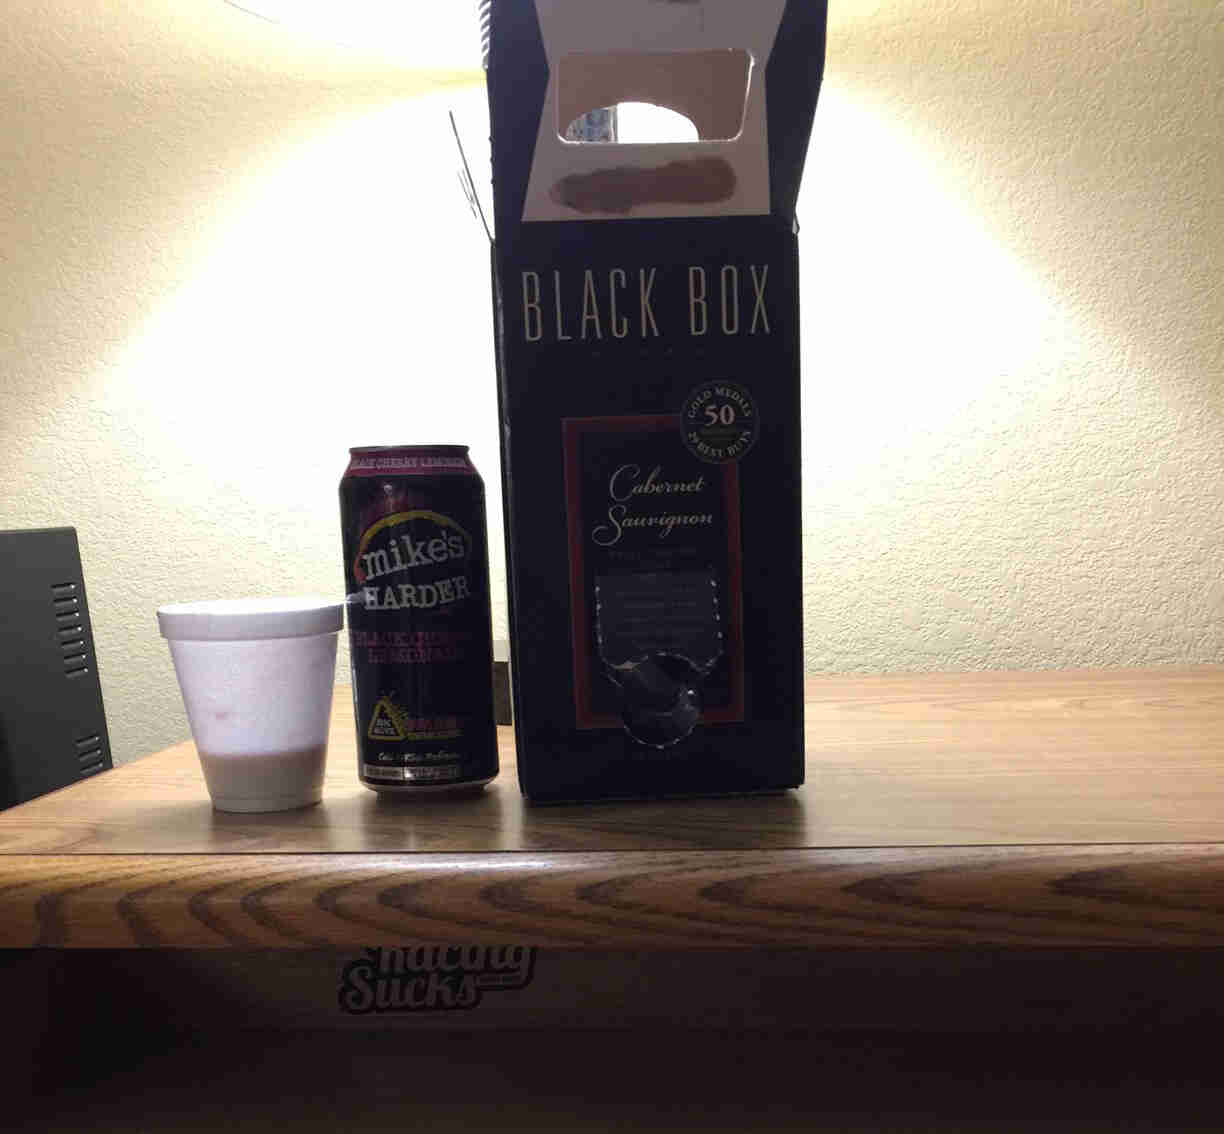 A styrofoam cup, a beverage can and a box of wine on a table top, with wall in the background